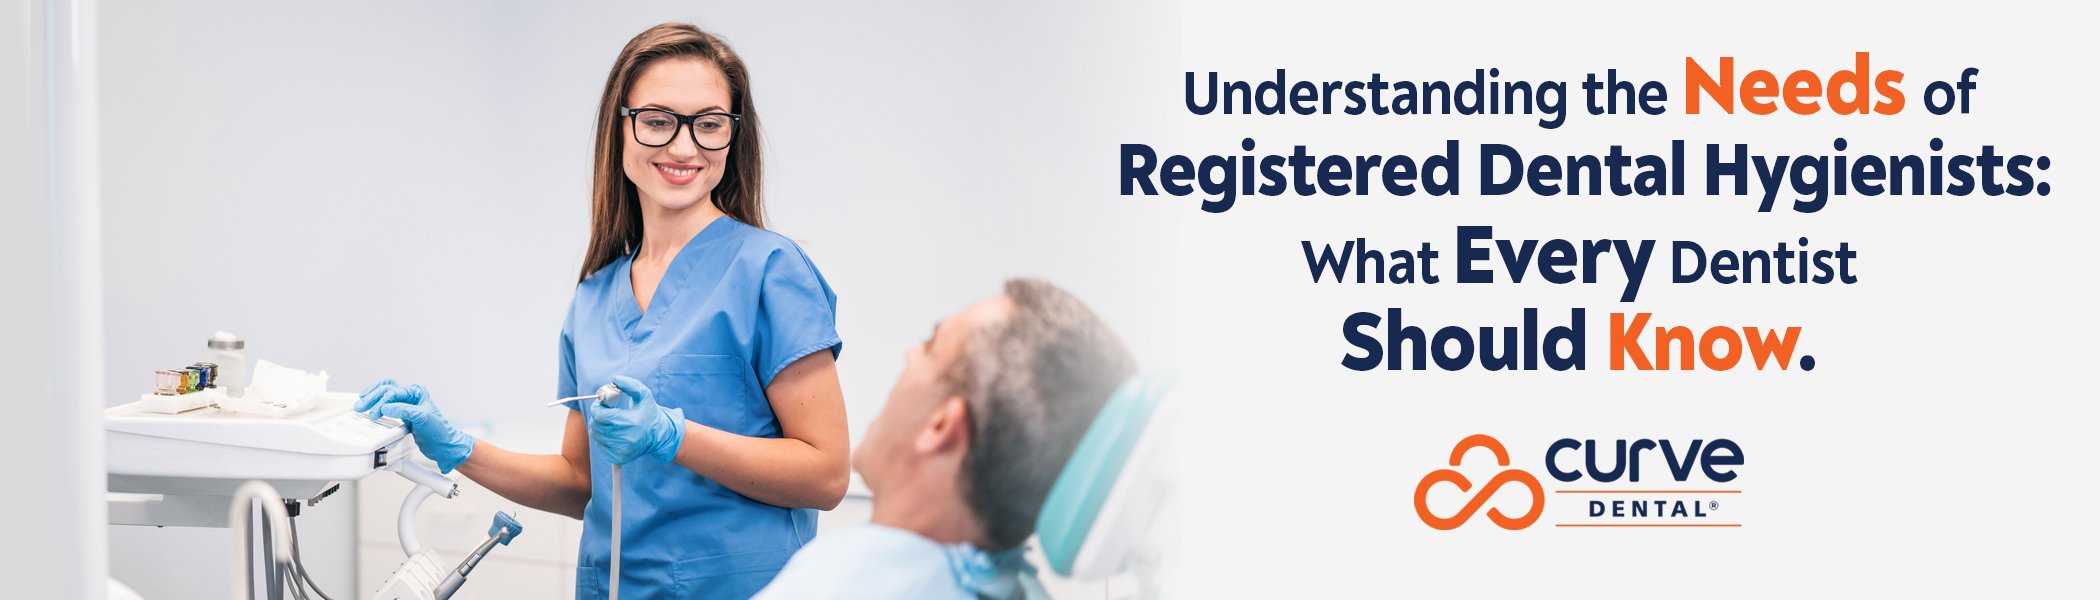 Understanding the Needs of Registered Dental Hygienists: What Every Dentist Should Know